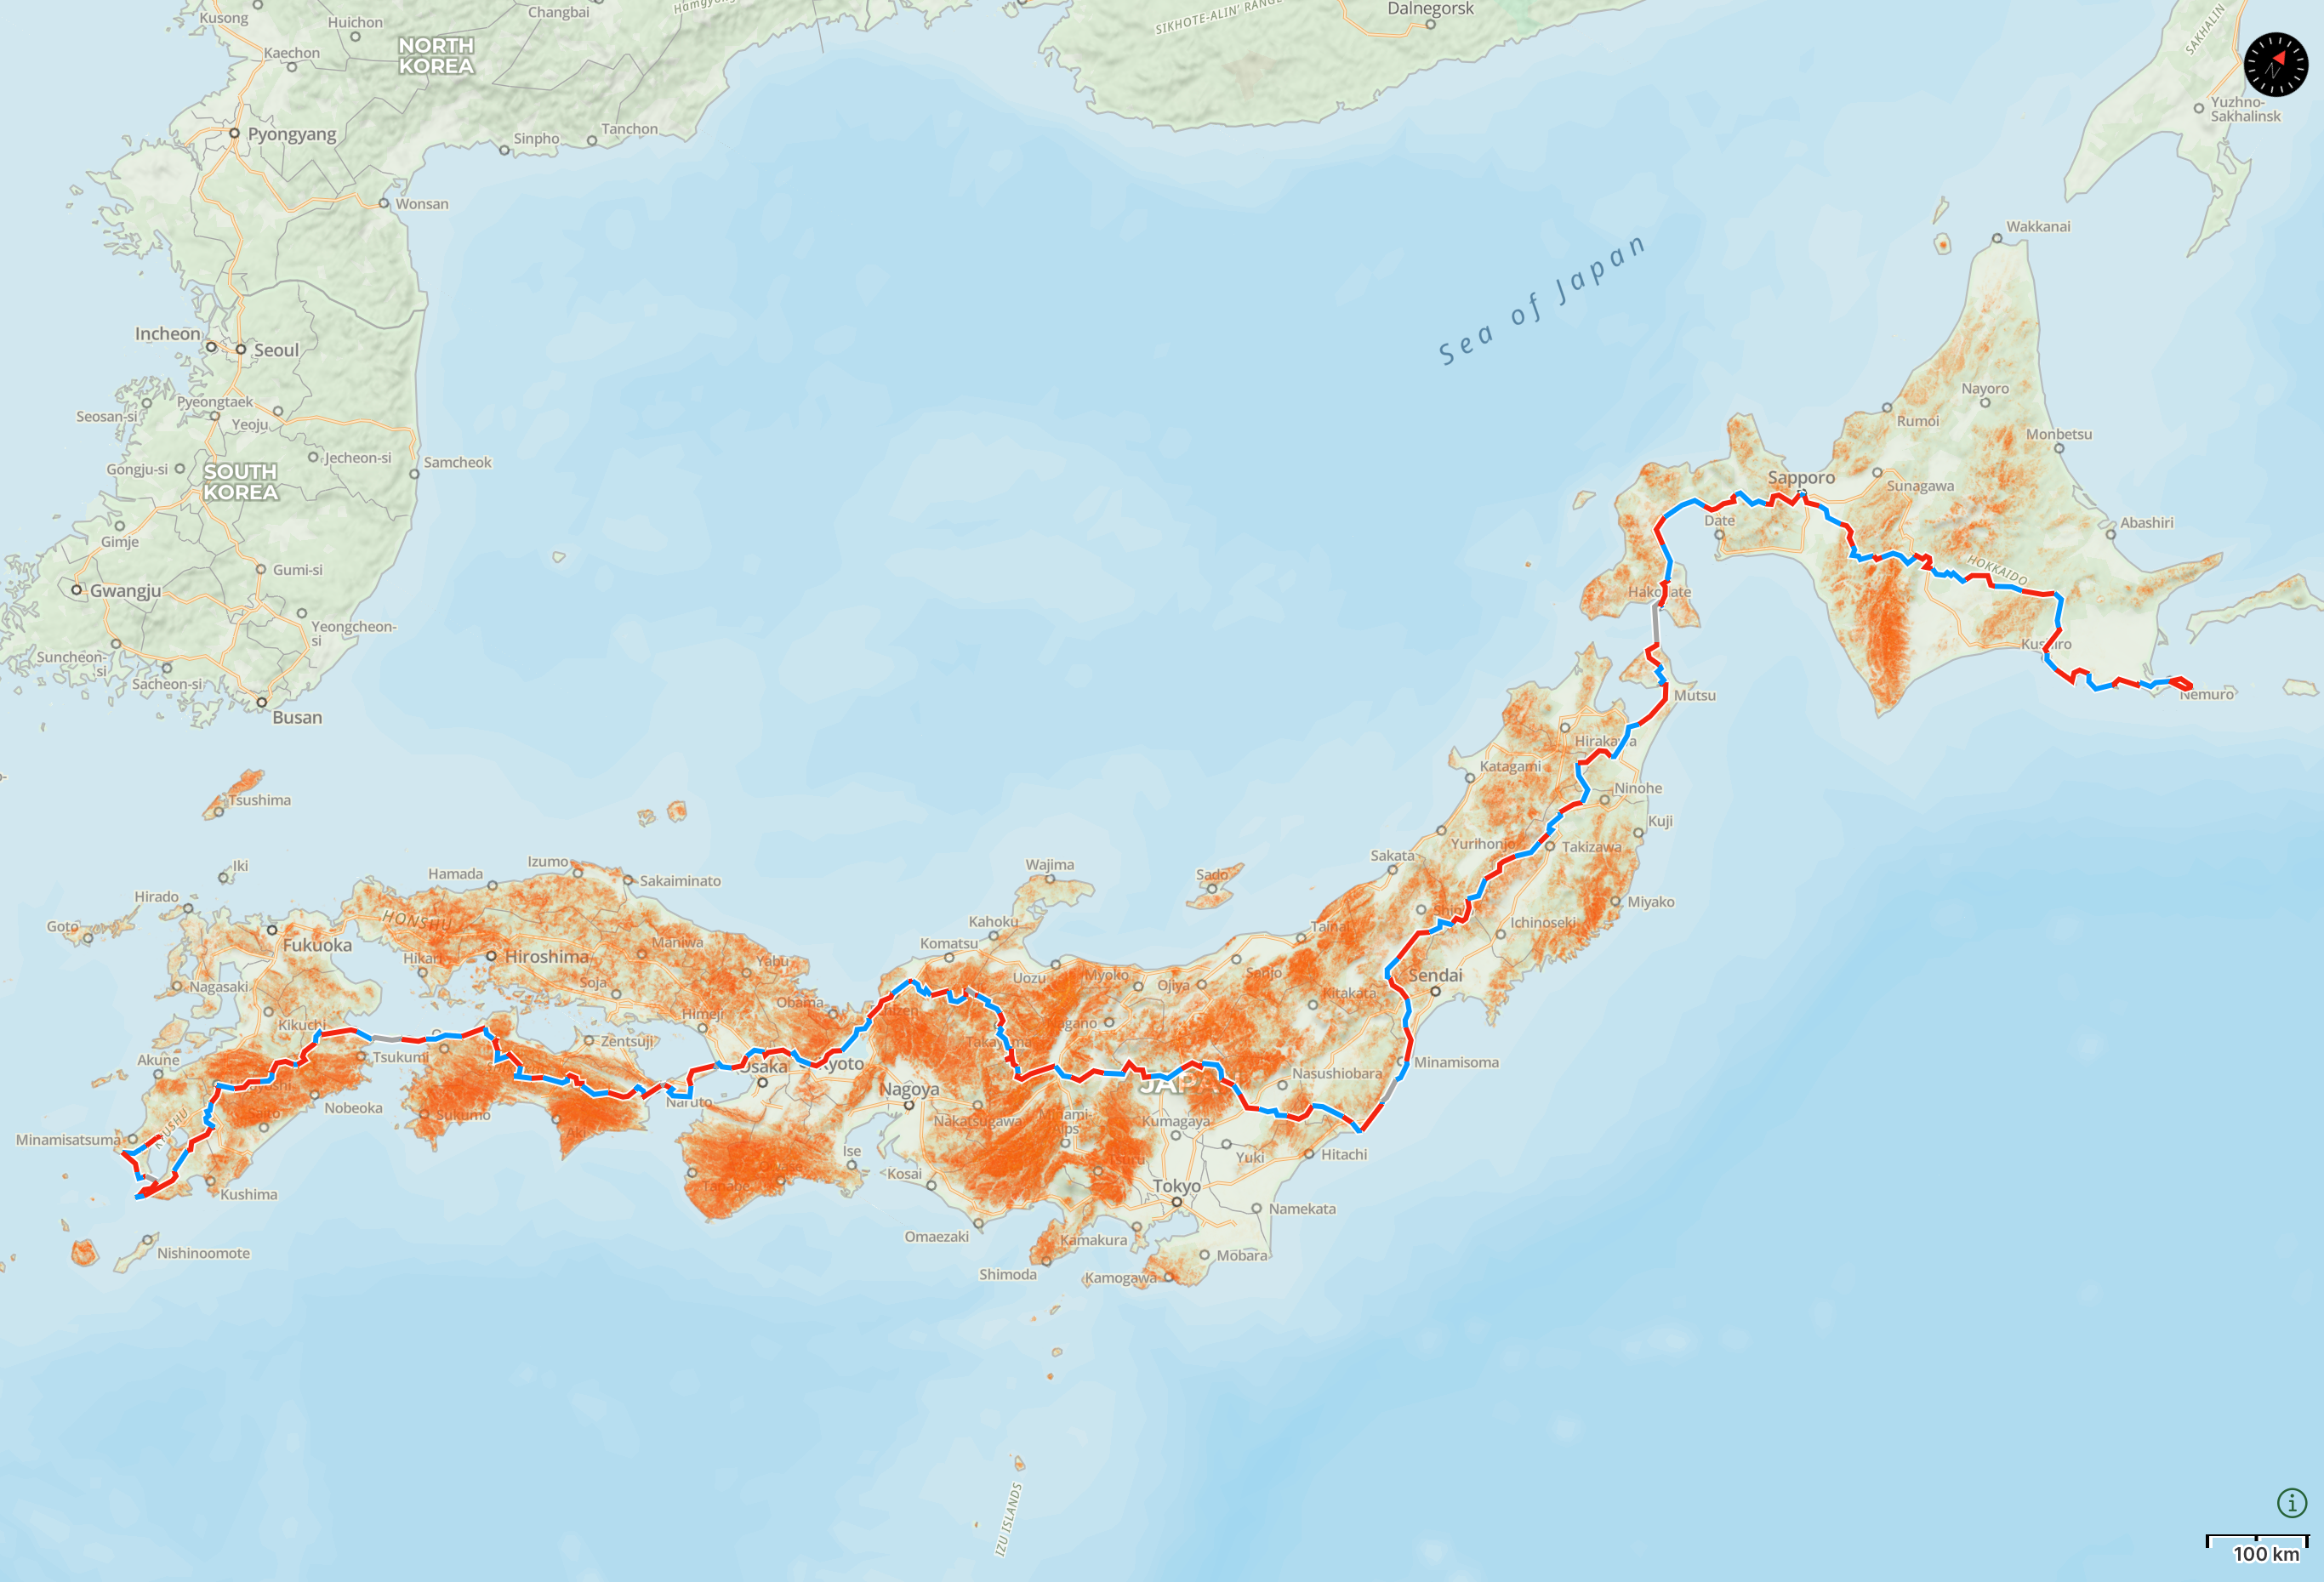 Map of Japan with the route of “These Walking Dreams” highlighted.